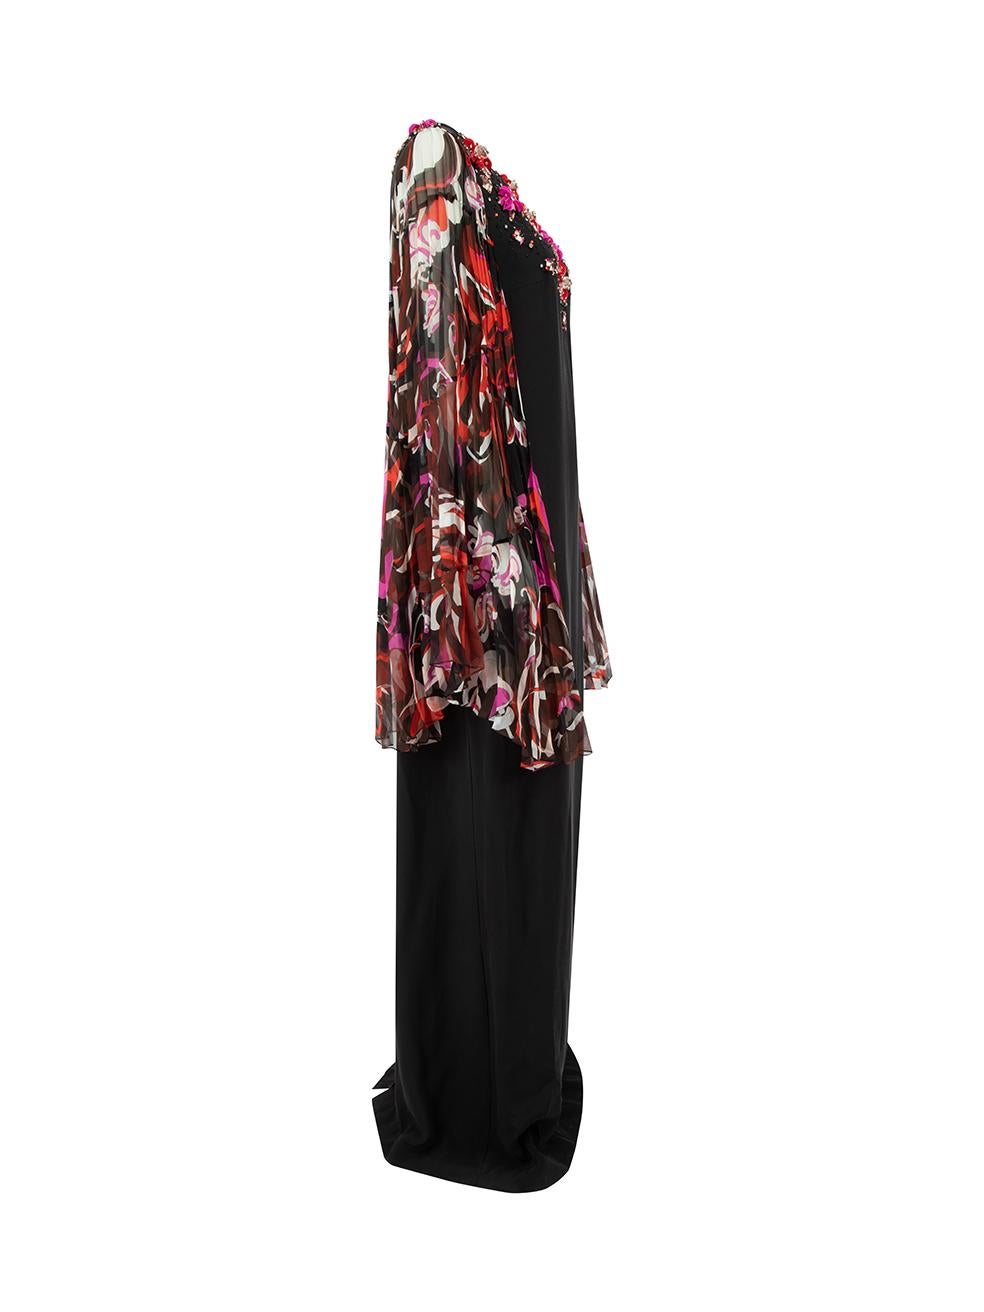 CONDITION is Very good. Minimal wear to dress is evident. Minimal wear to the outer fabric on this used Emilio Pucci designer resale item. Details Black Silk Multicolour beaded design Multicolour patterned sleeves Long pleated sleeves Maxi length 2x